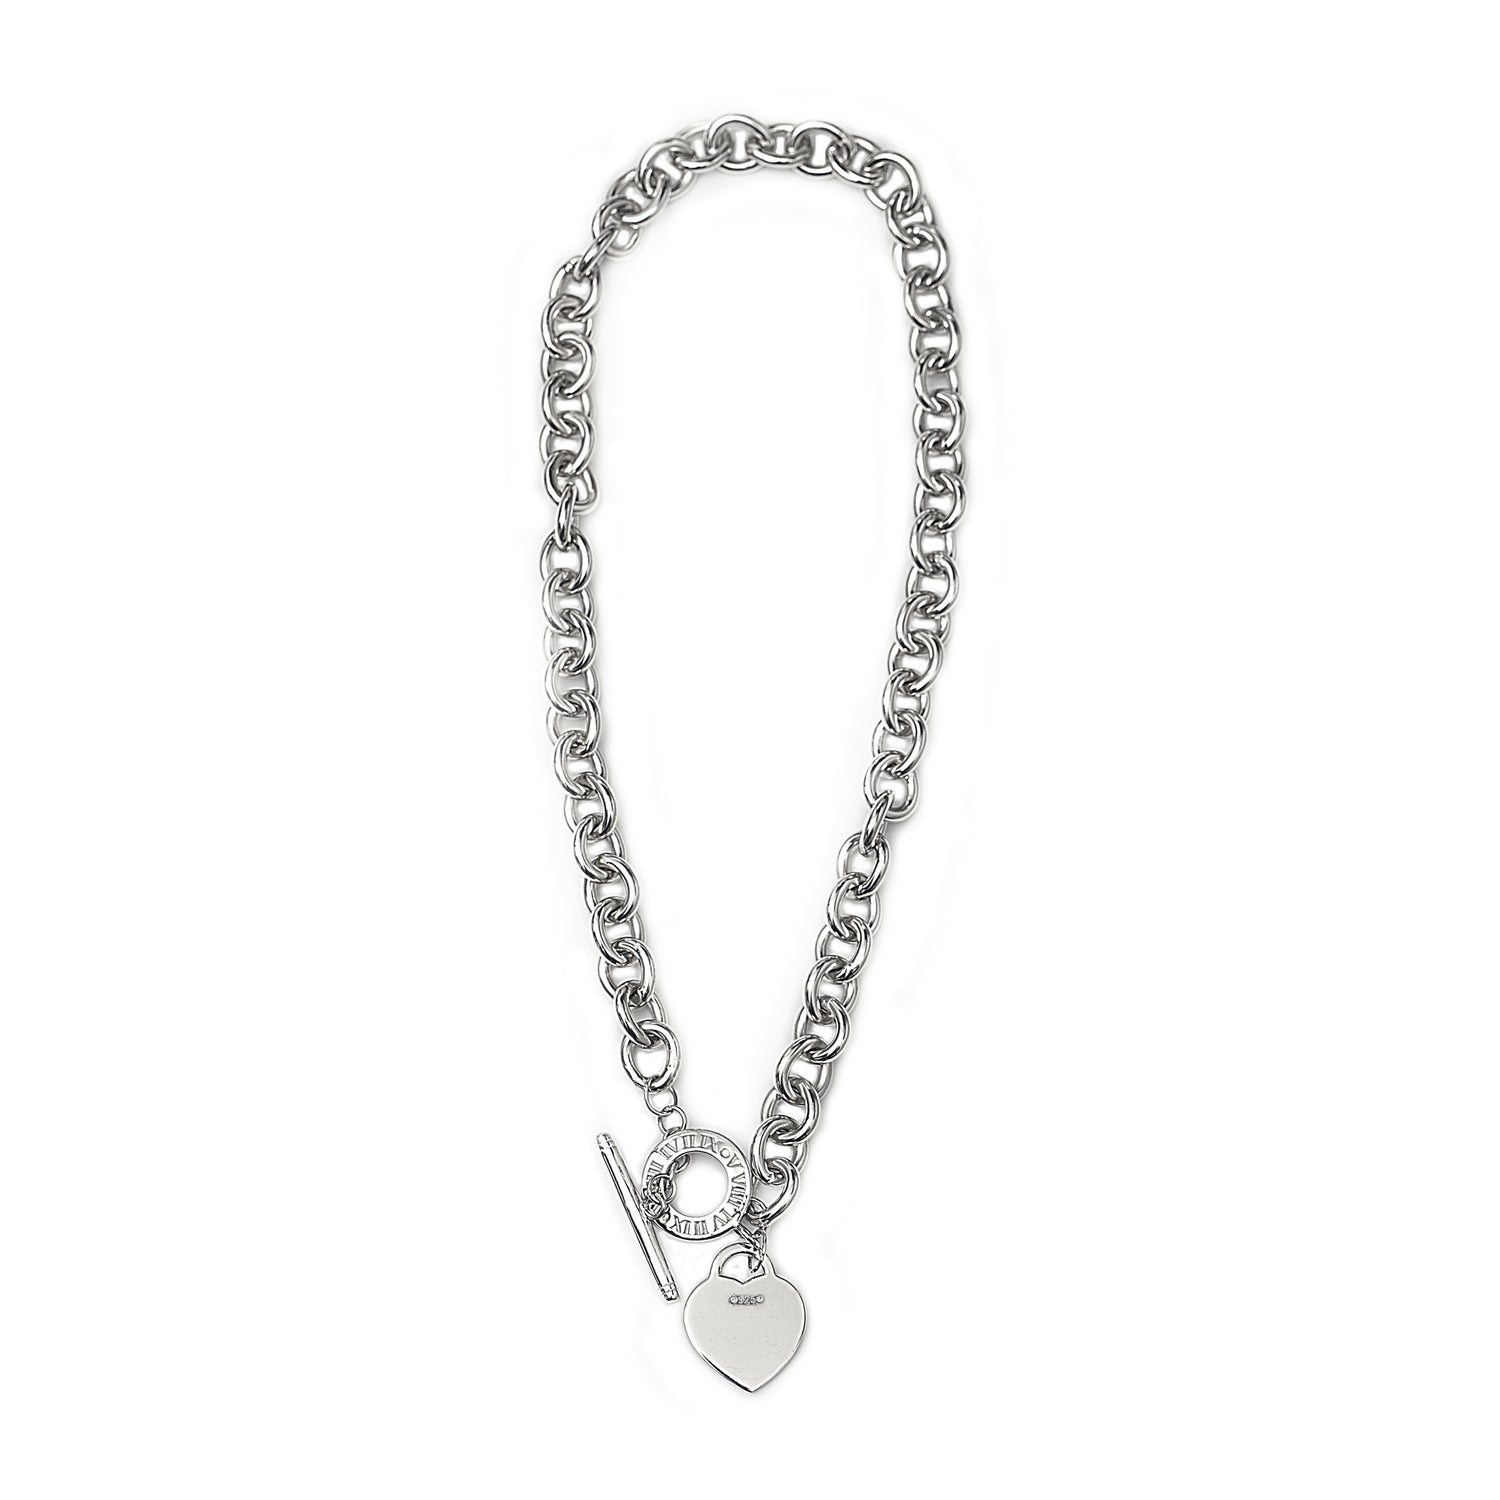 Amore Necklace in 925 Sterling Silver, classic thick belcher style necklace with a traditional FOB clasp and heart charm. Worldwide shipping plus FREE shipping within Australia. Affordable luxury jewellery by Bellagio & Co.